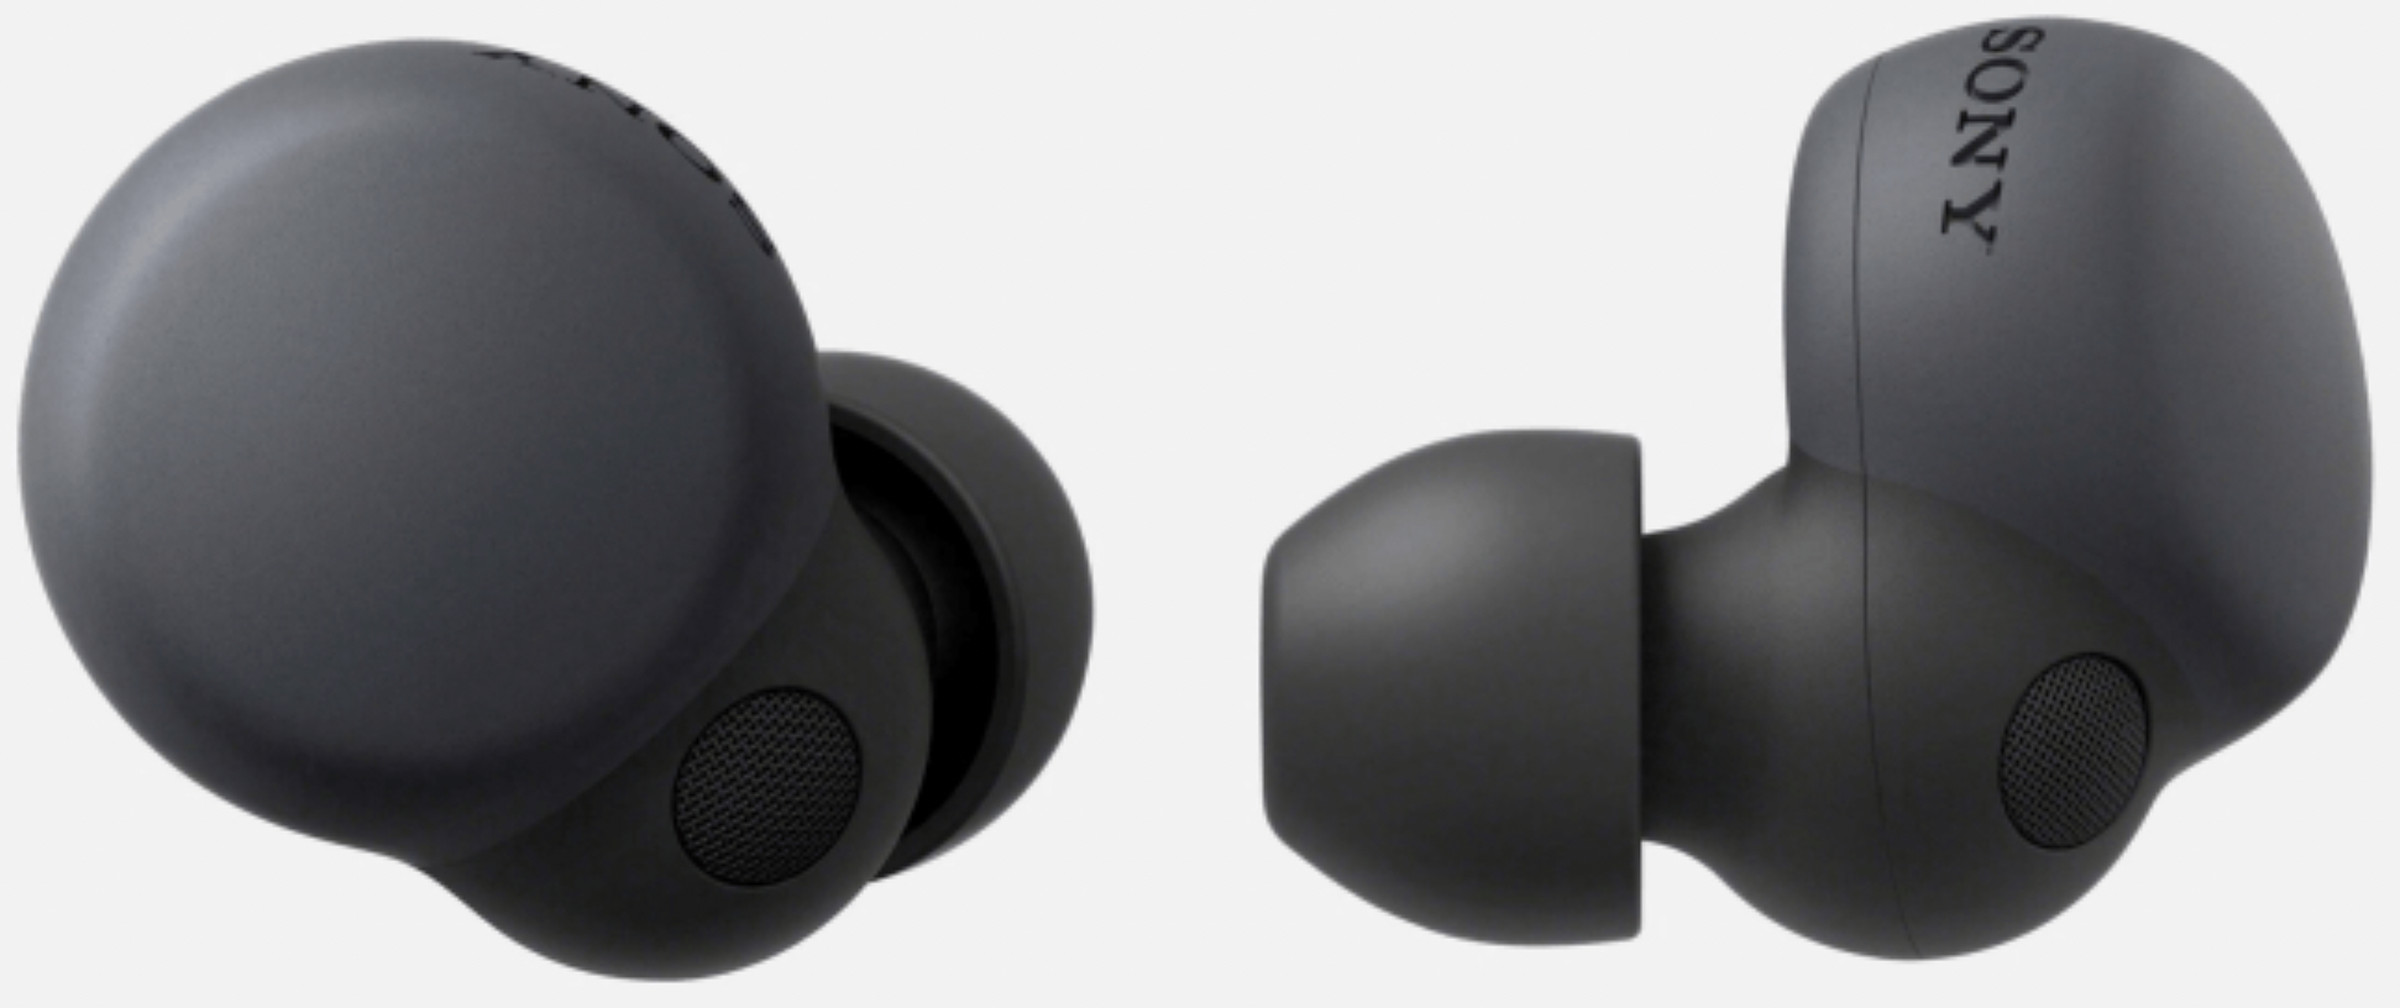 The LinkBuds S could come with adaptive sound control.